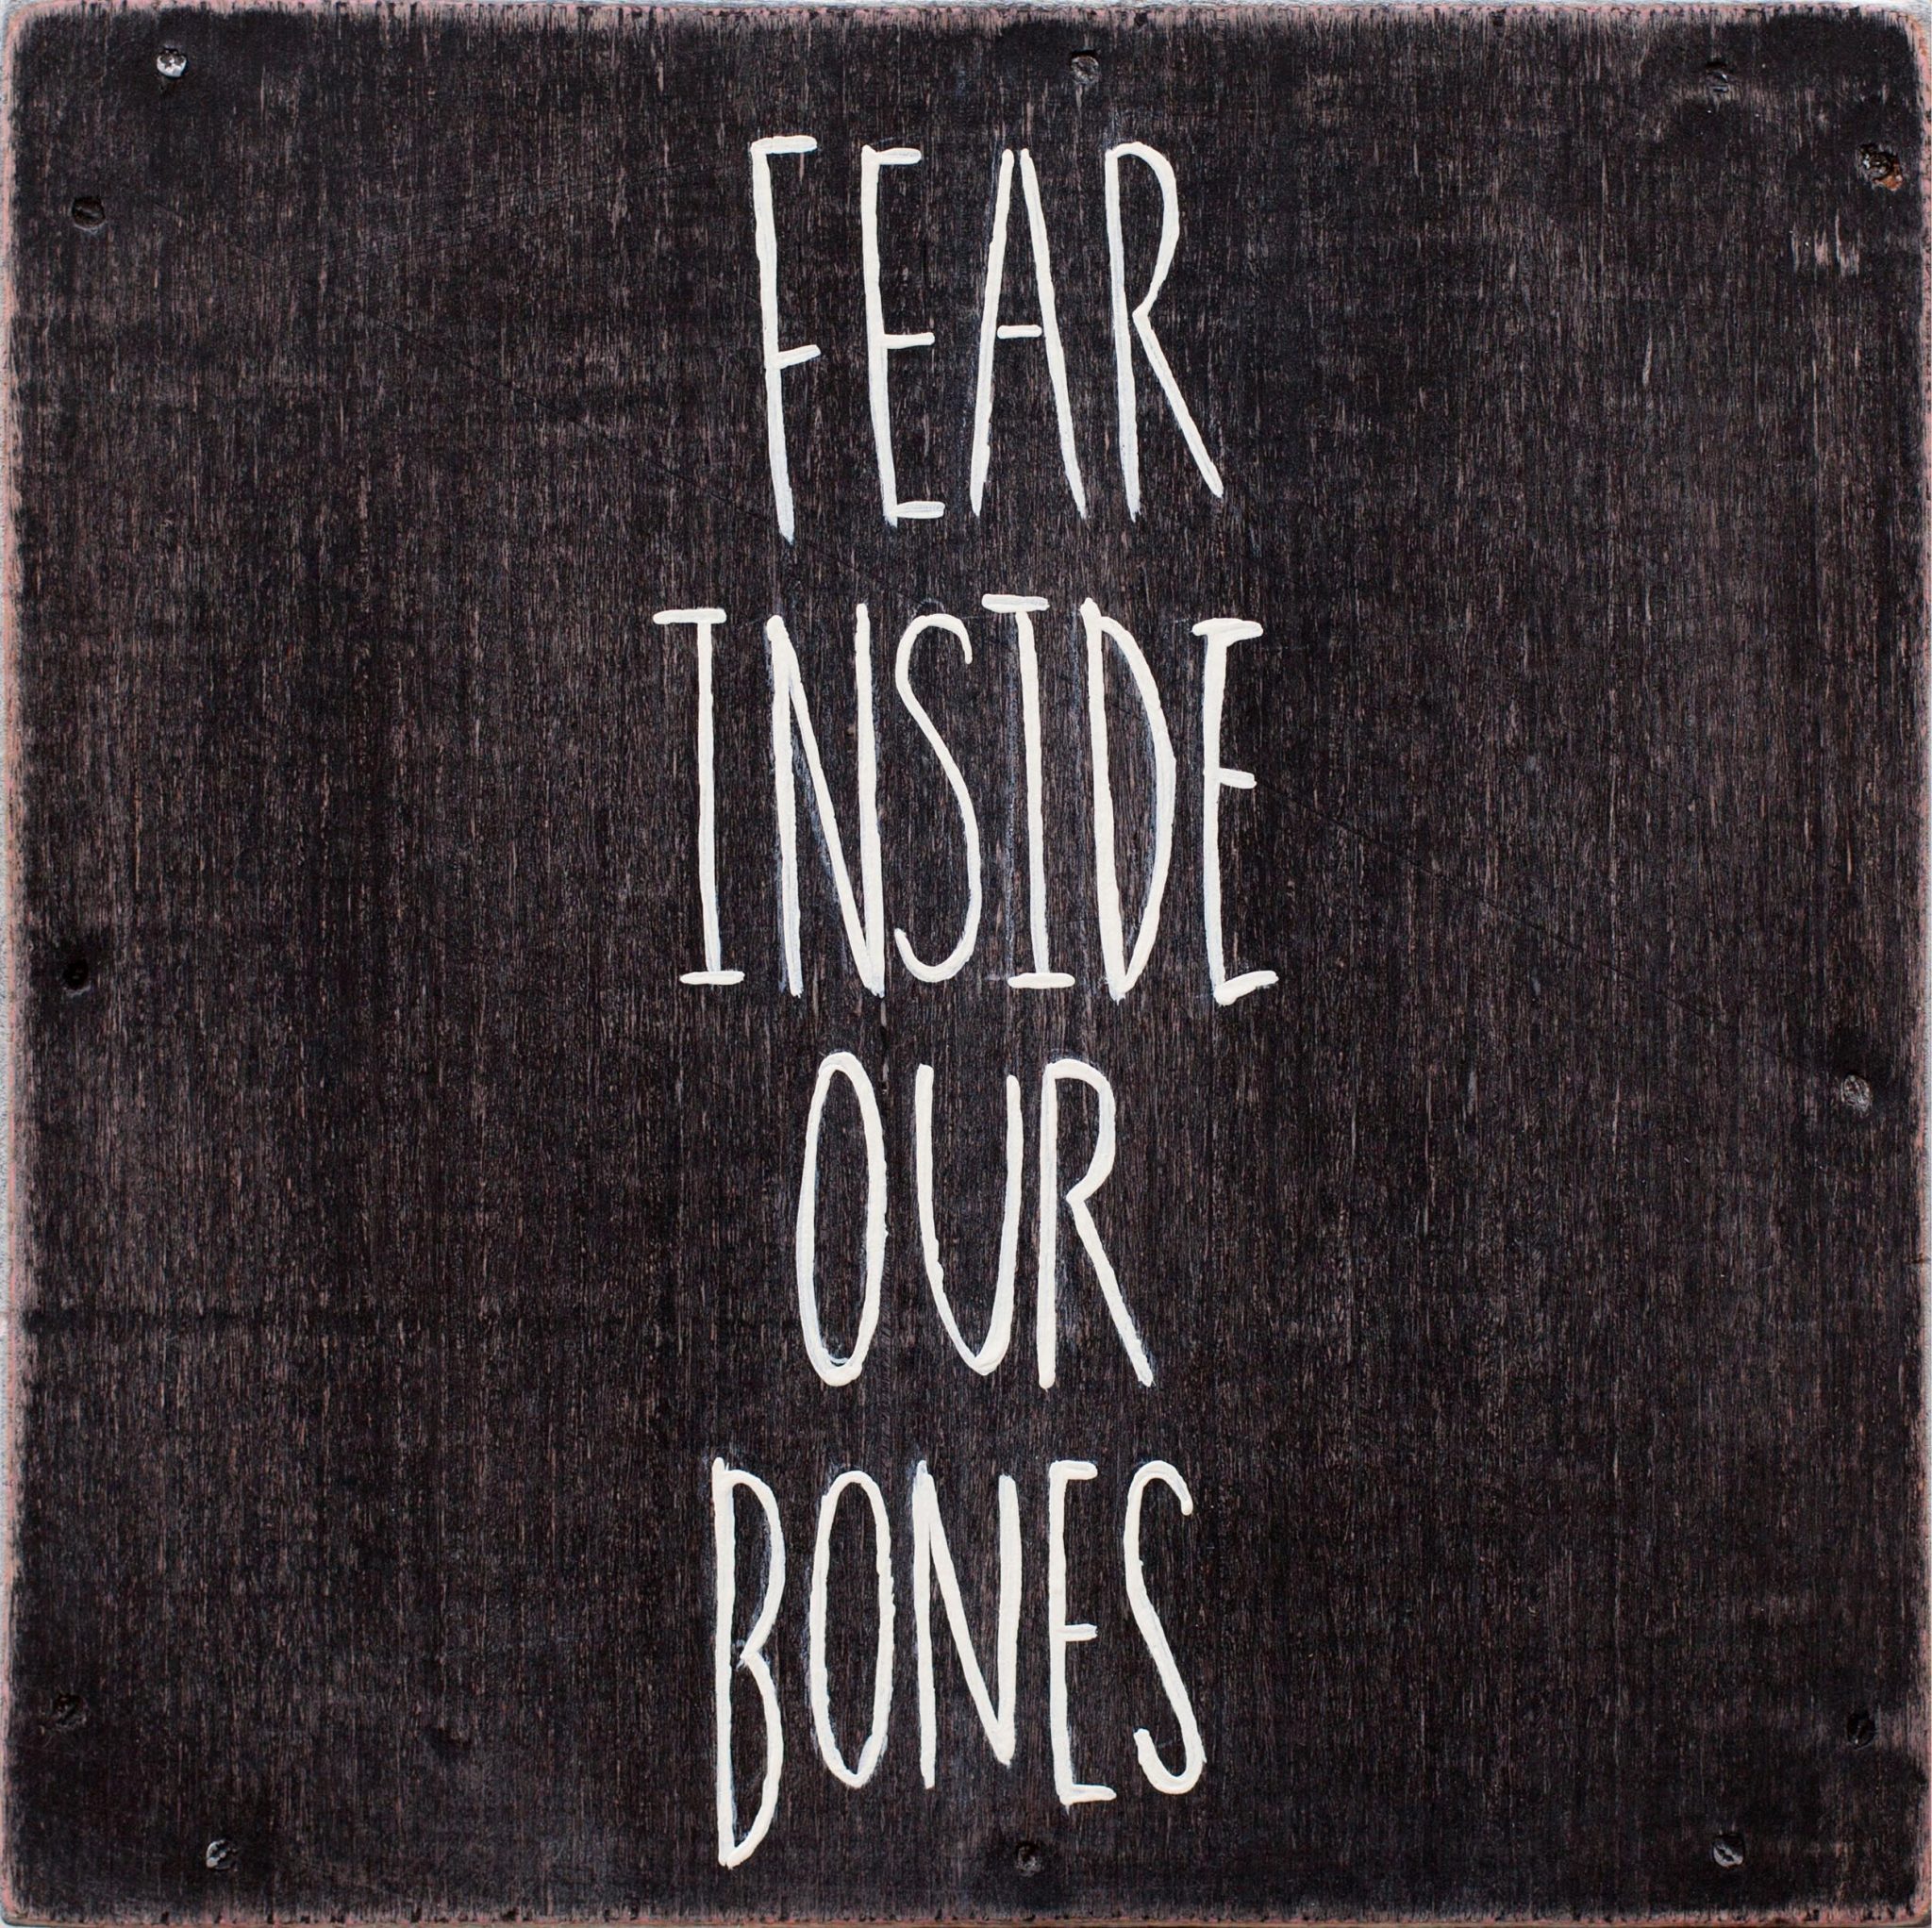 News Added Jun 05, 2012 Fear Inside Our Bones is the 3rd album by the alternative-rock band The Almost. It will be released on Tooth & Nail Records in June 2013. The first song from the album, titled Ghost, has been released on January 4th 2013. The first official single from the album, "I'm Down", […]